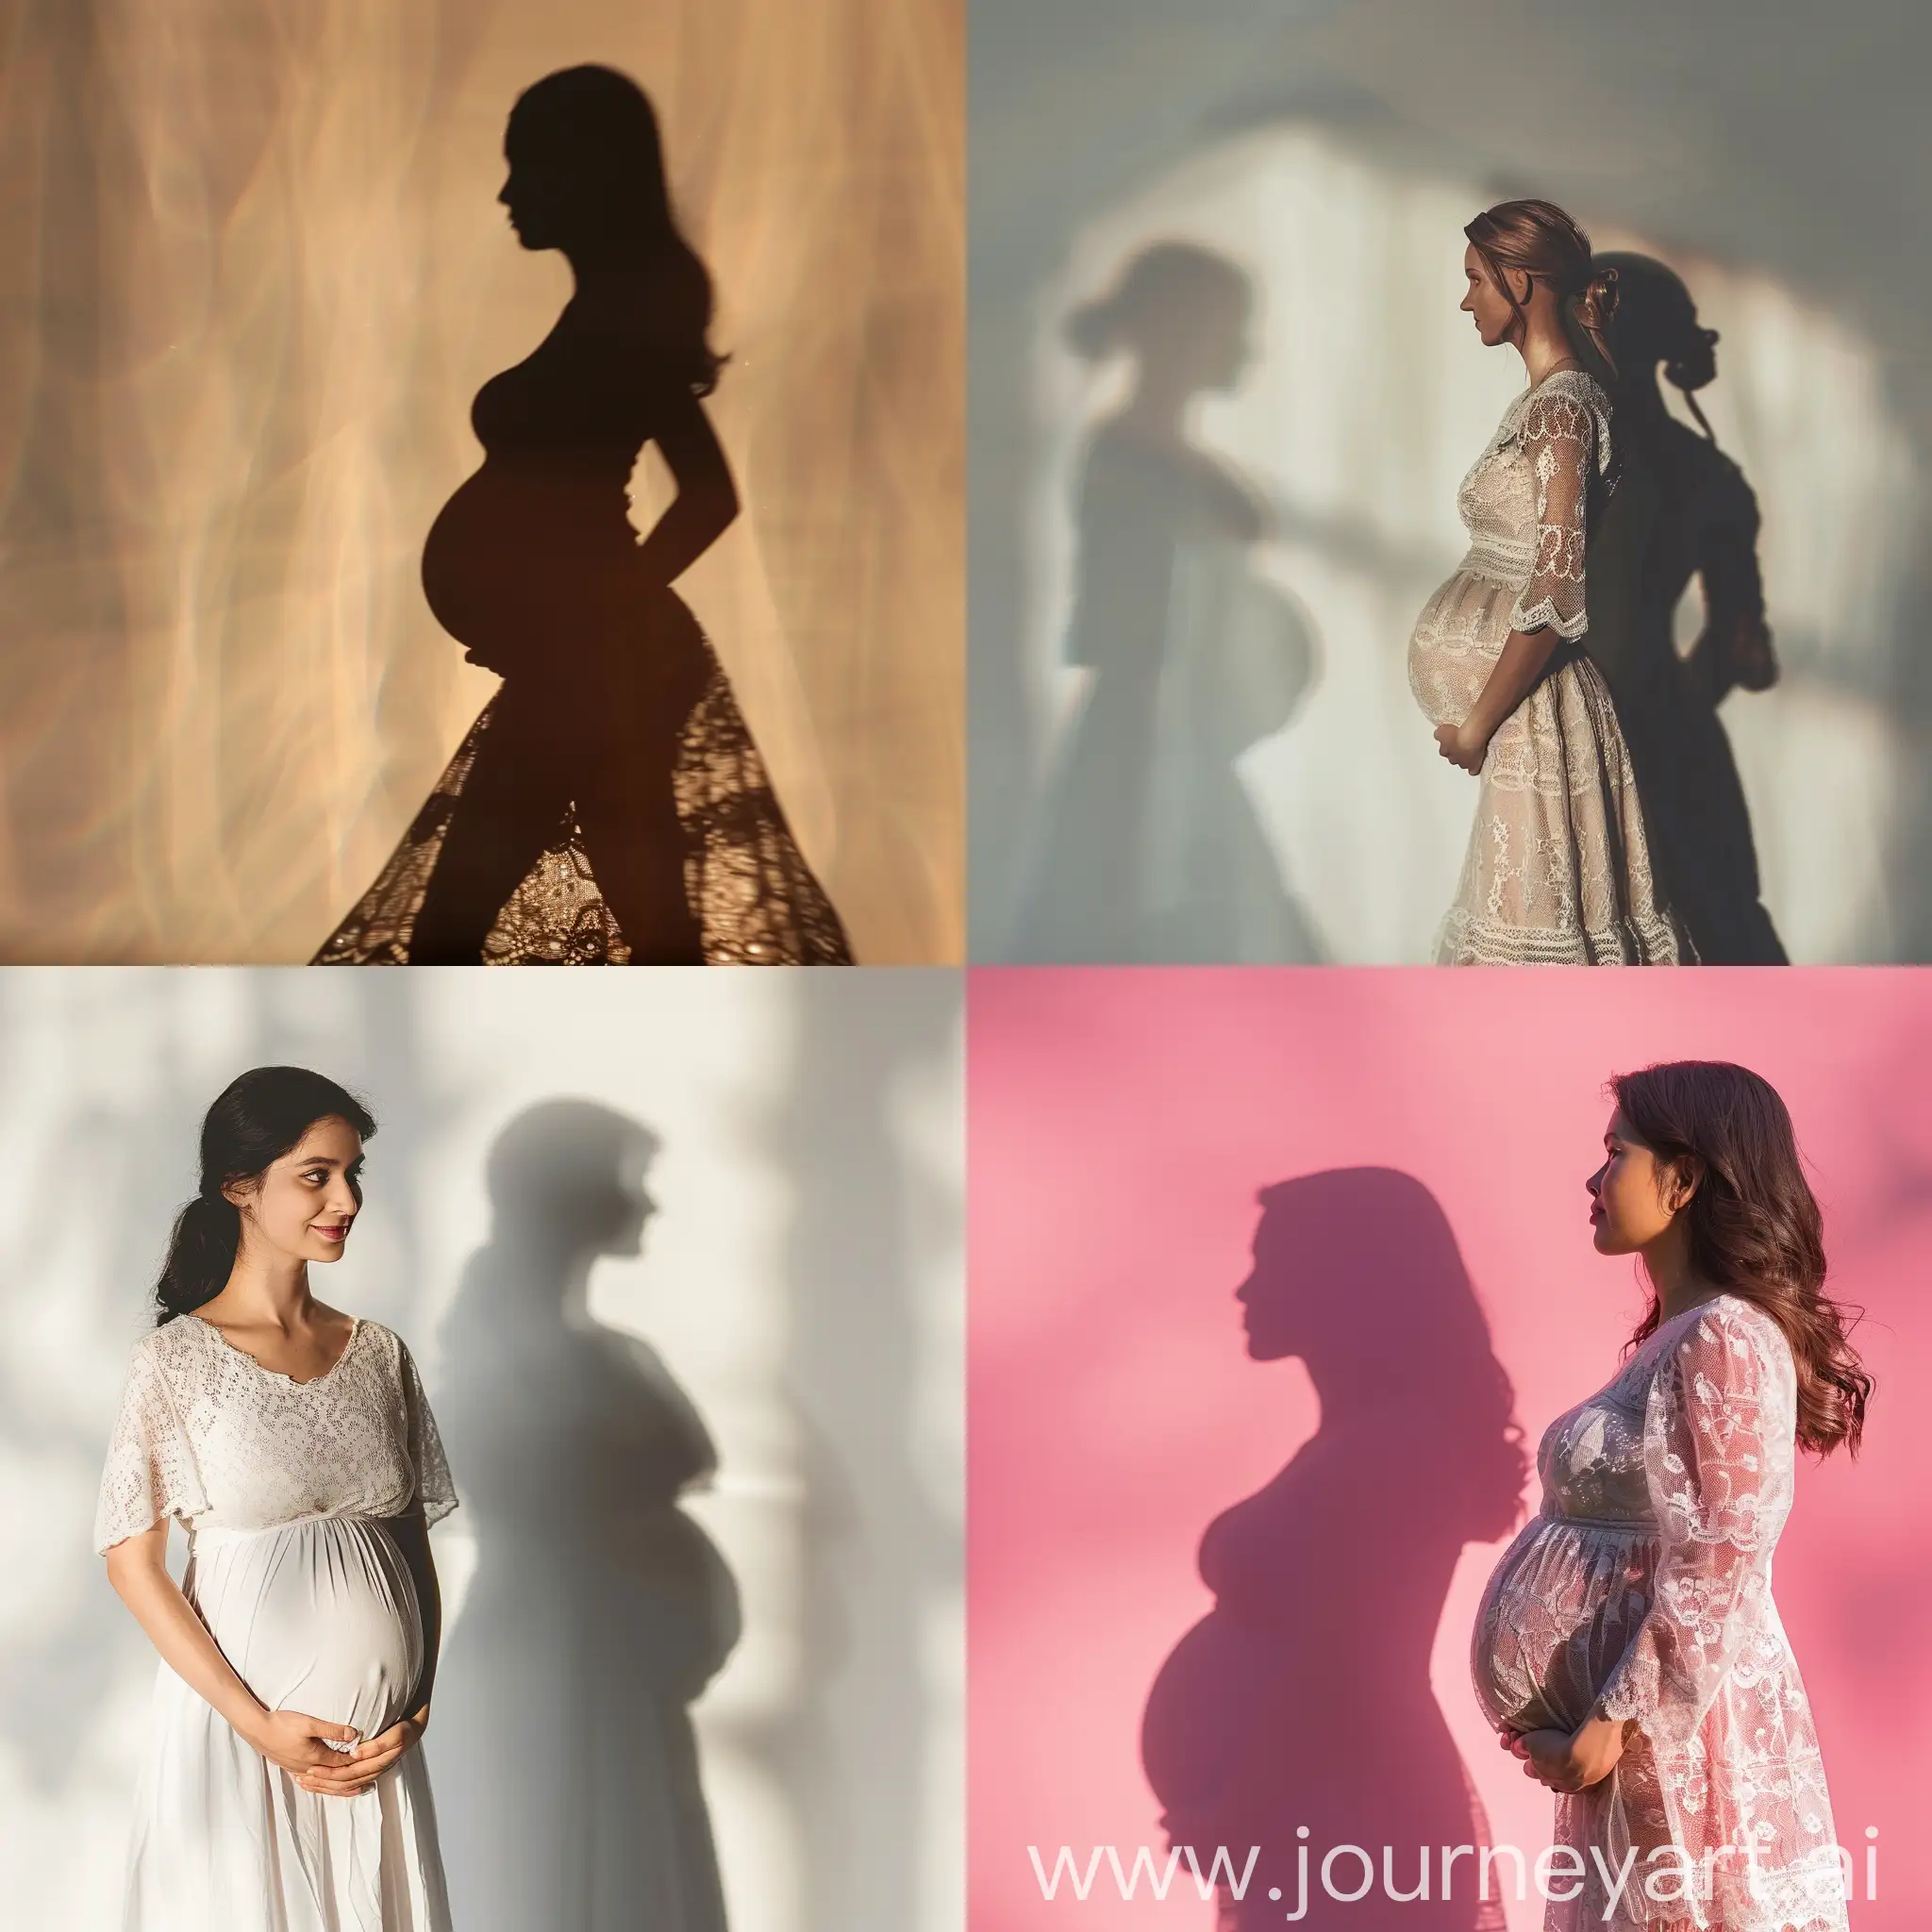 Celebrating-Motherhood-Beautiful-Silhouette-of-a-Pregnant-Woman-on-Mothers-Day